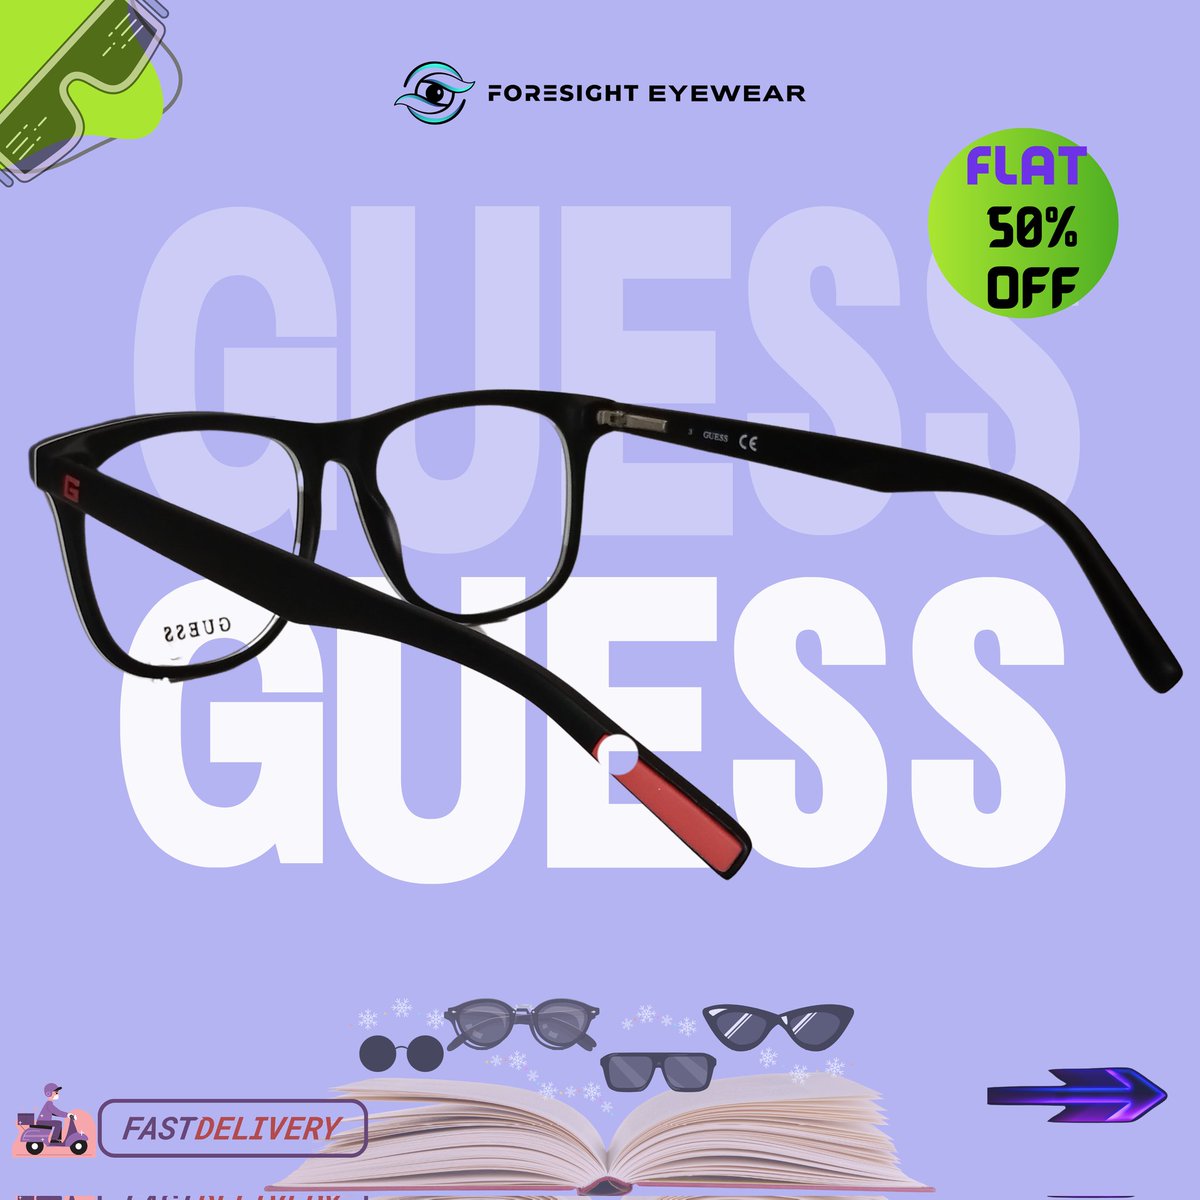 👀 Guess what's making heads turn? 
Check out our Guess Eyewear collection! 👓💫 

50% Discount on the mentioned prices 🤩

Slide into our DMs or tap the link in our bio to chat with us on WhatsApp and score your perfect pair today! 📲💥💬

#GuessEyewear #ForeSightEyewear #DMus